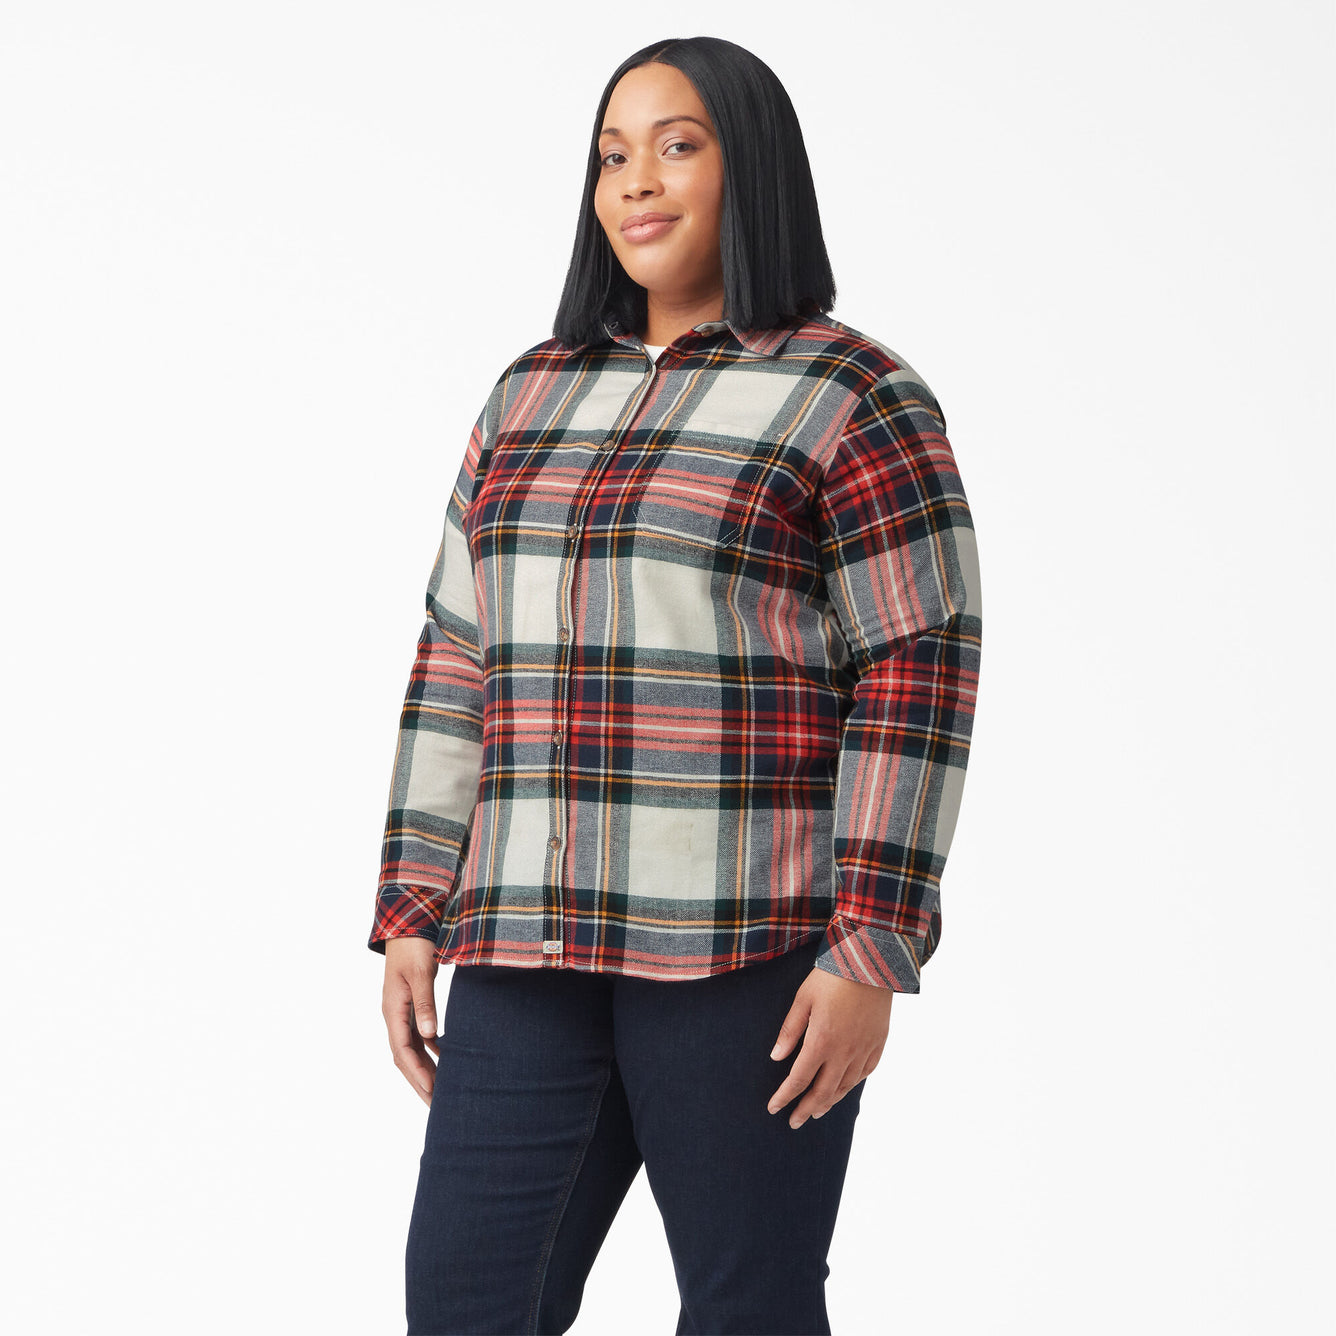 Dickies - #FLW075 - Made to Fit the Curvy Girl - Women's Plus Size